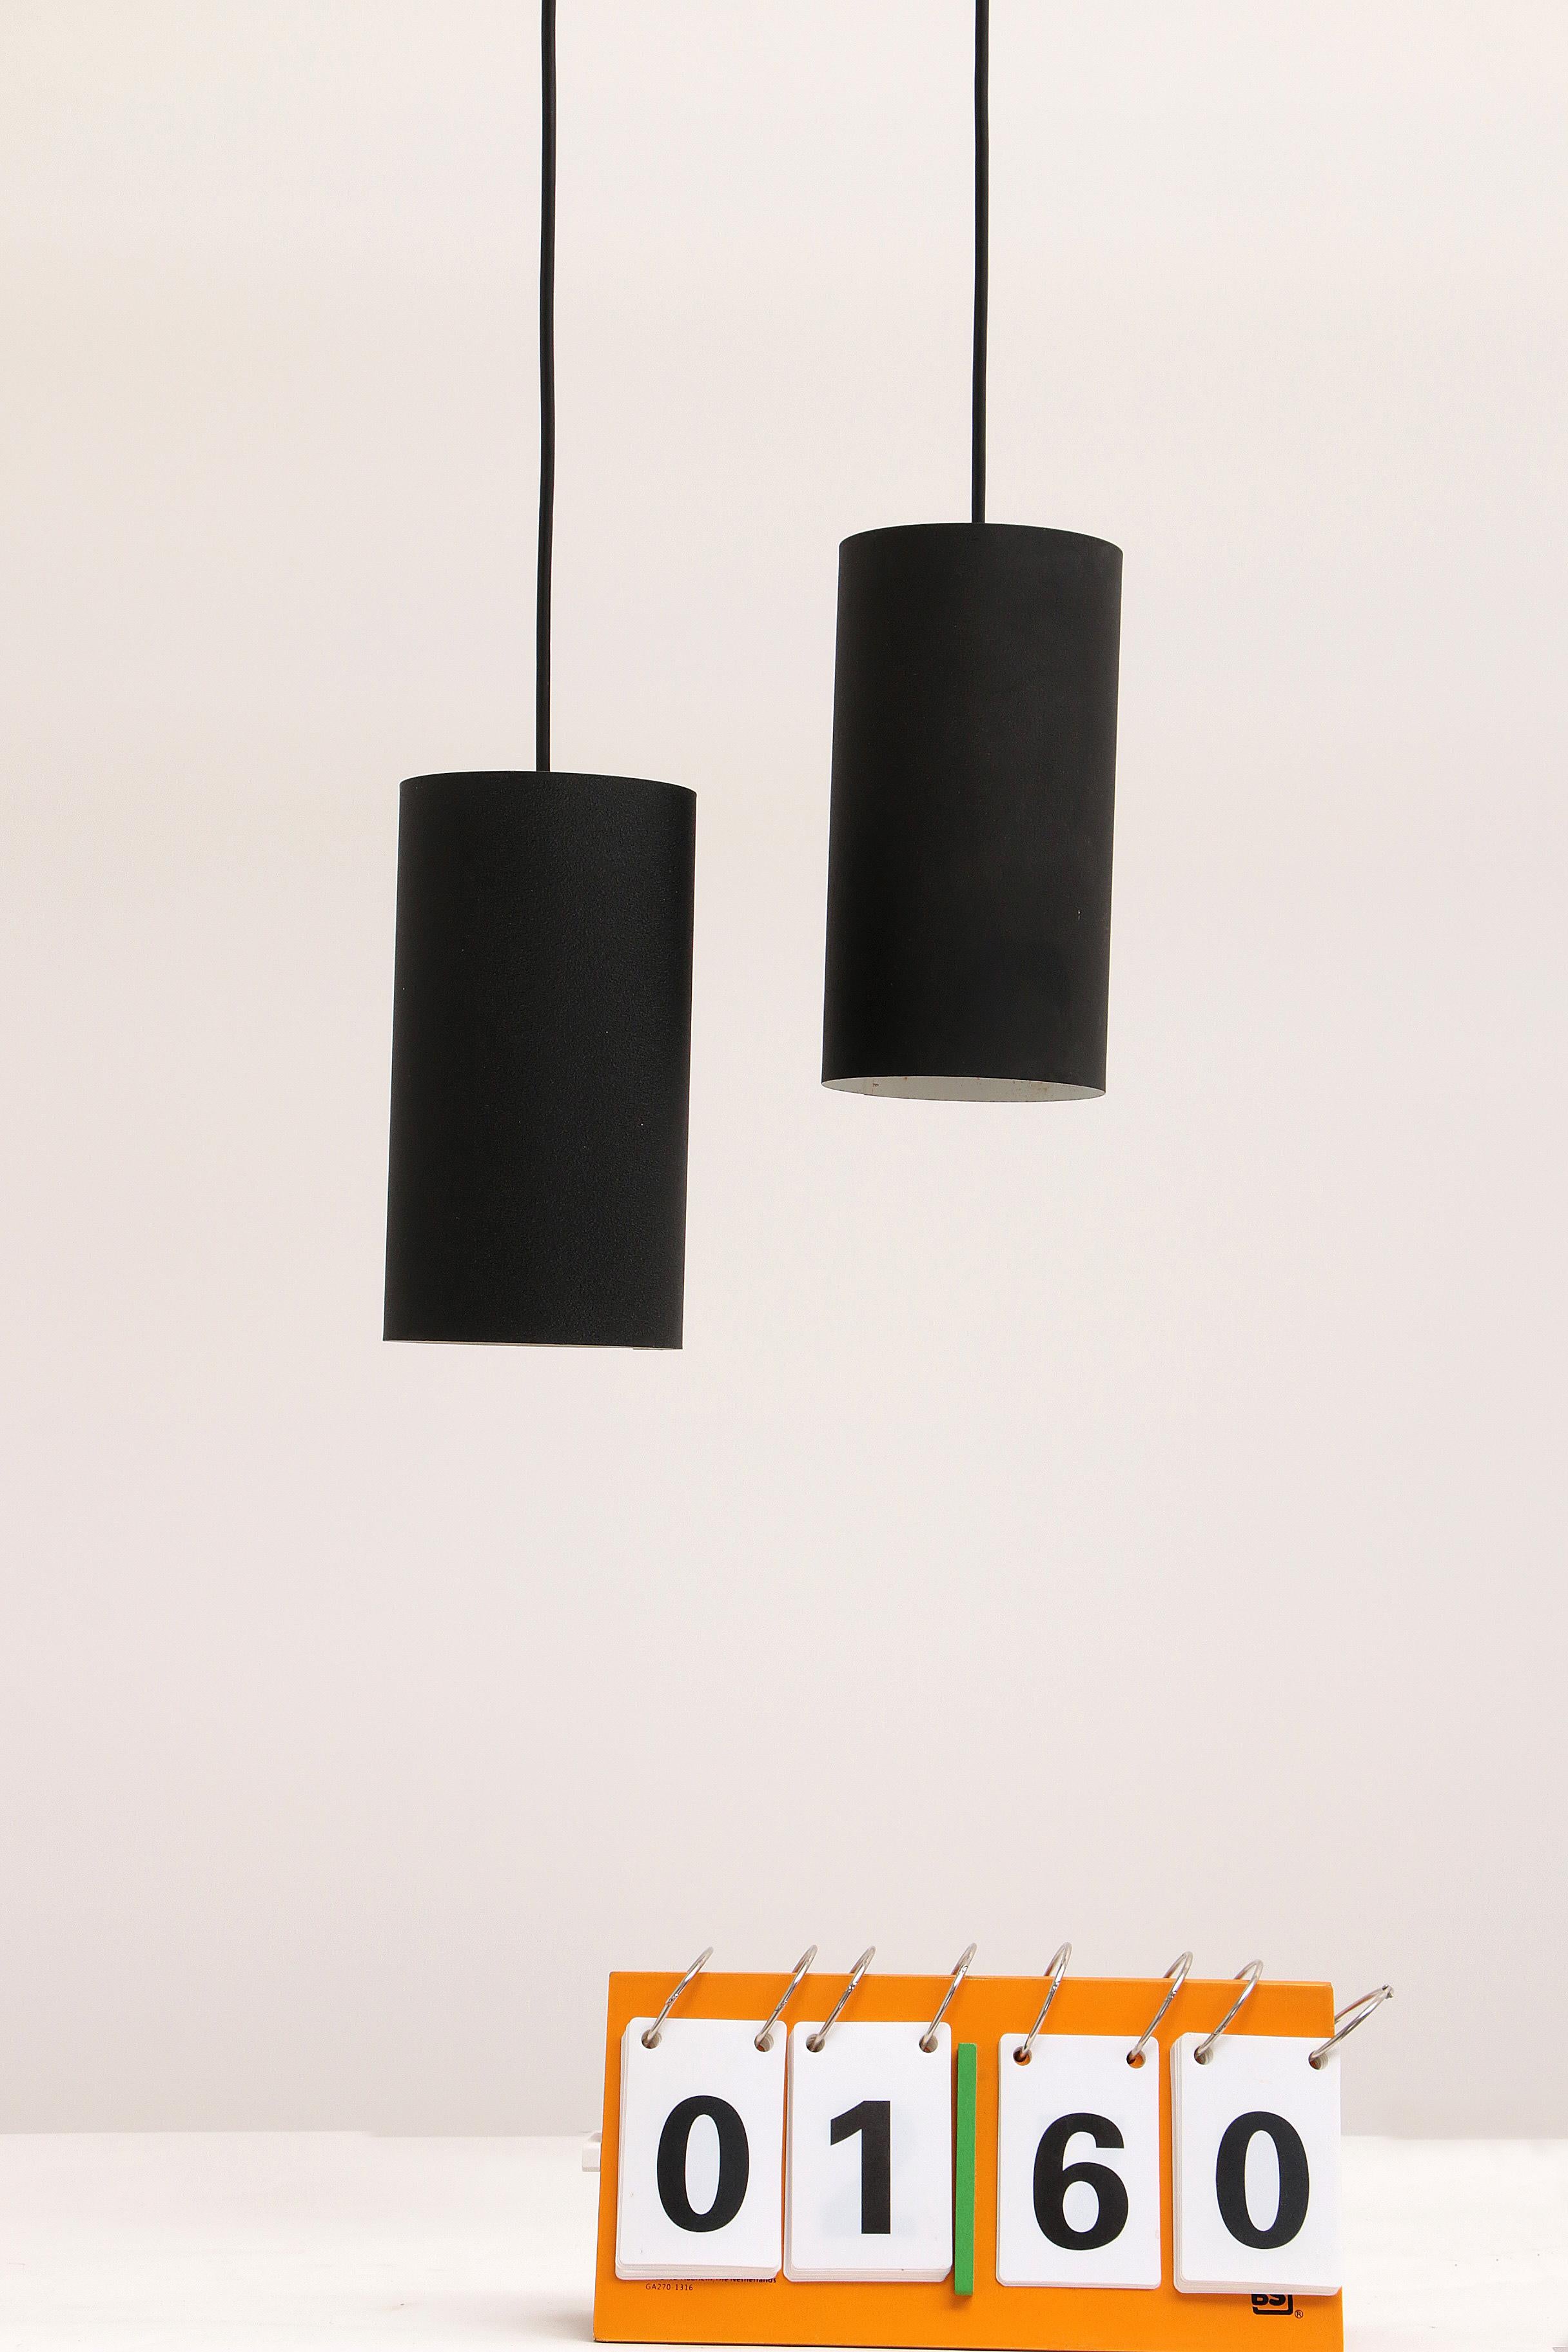 Philips Set of 2 Hanging Lamps Model Nt 48 Design by Argenta, 1960 For Sale 6